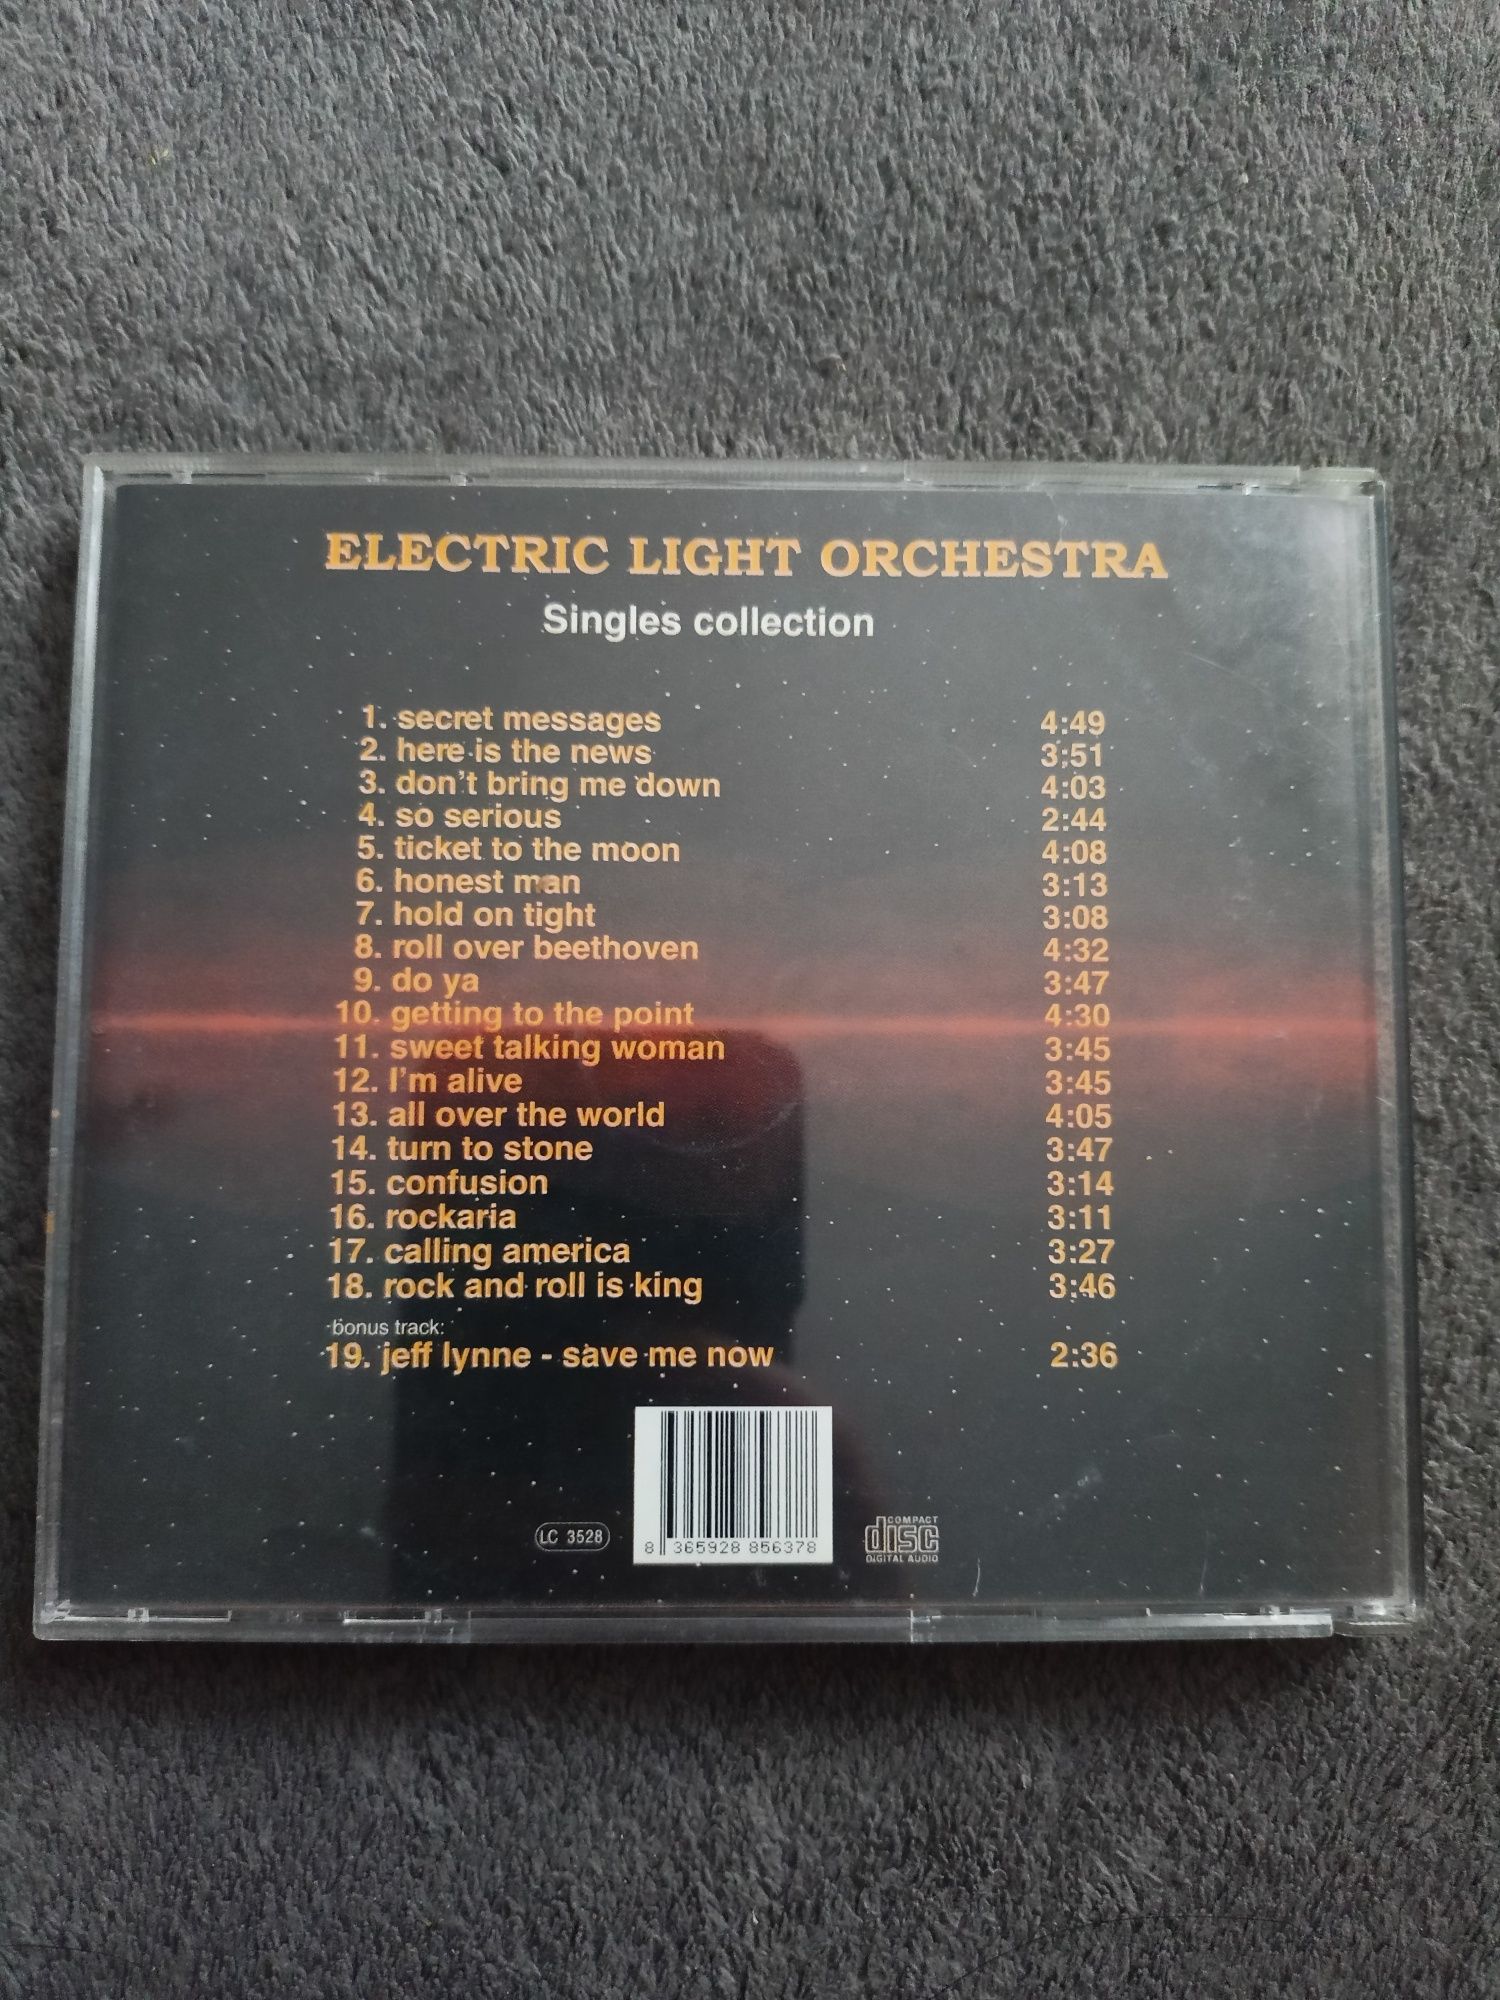 Electric light orchestra - singles collection, unikat, CD !